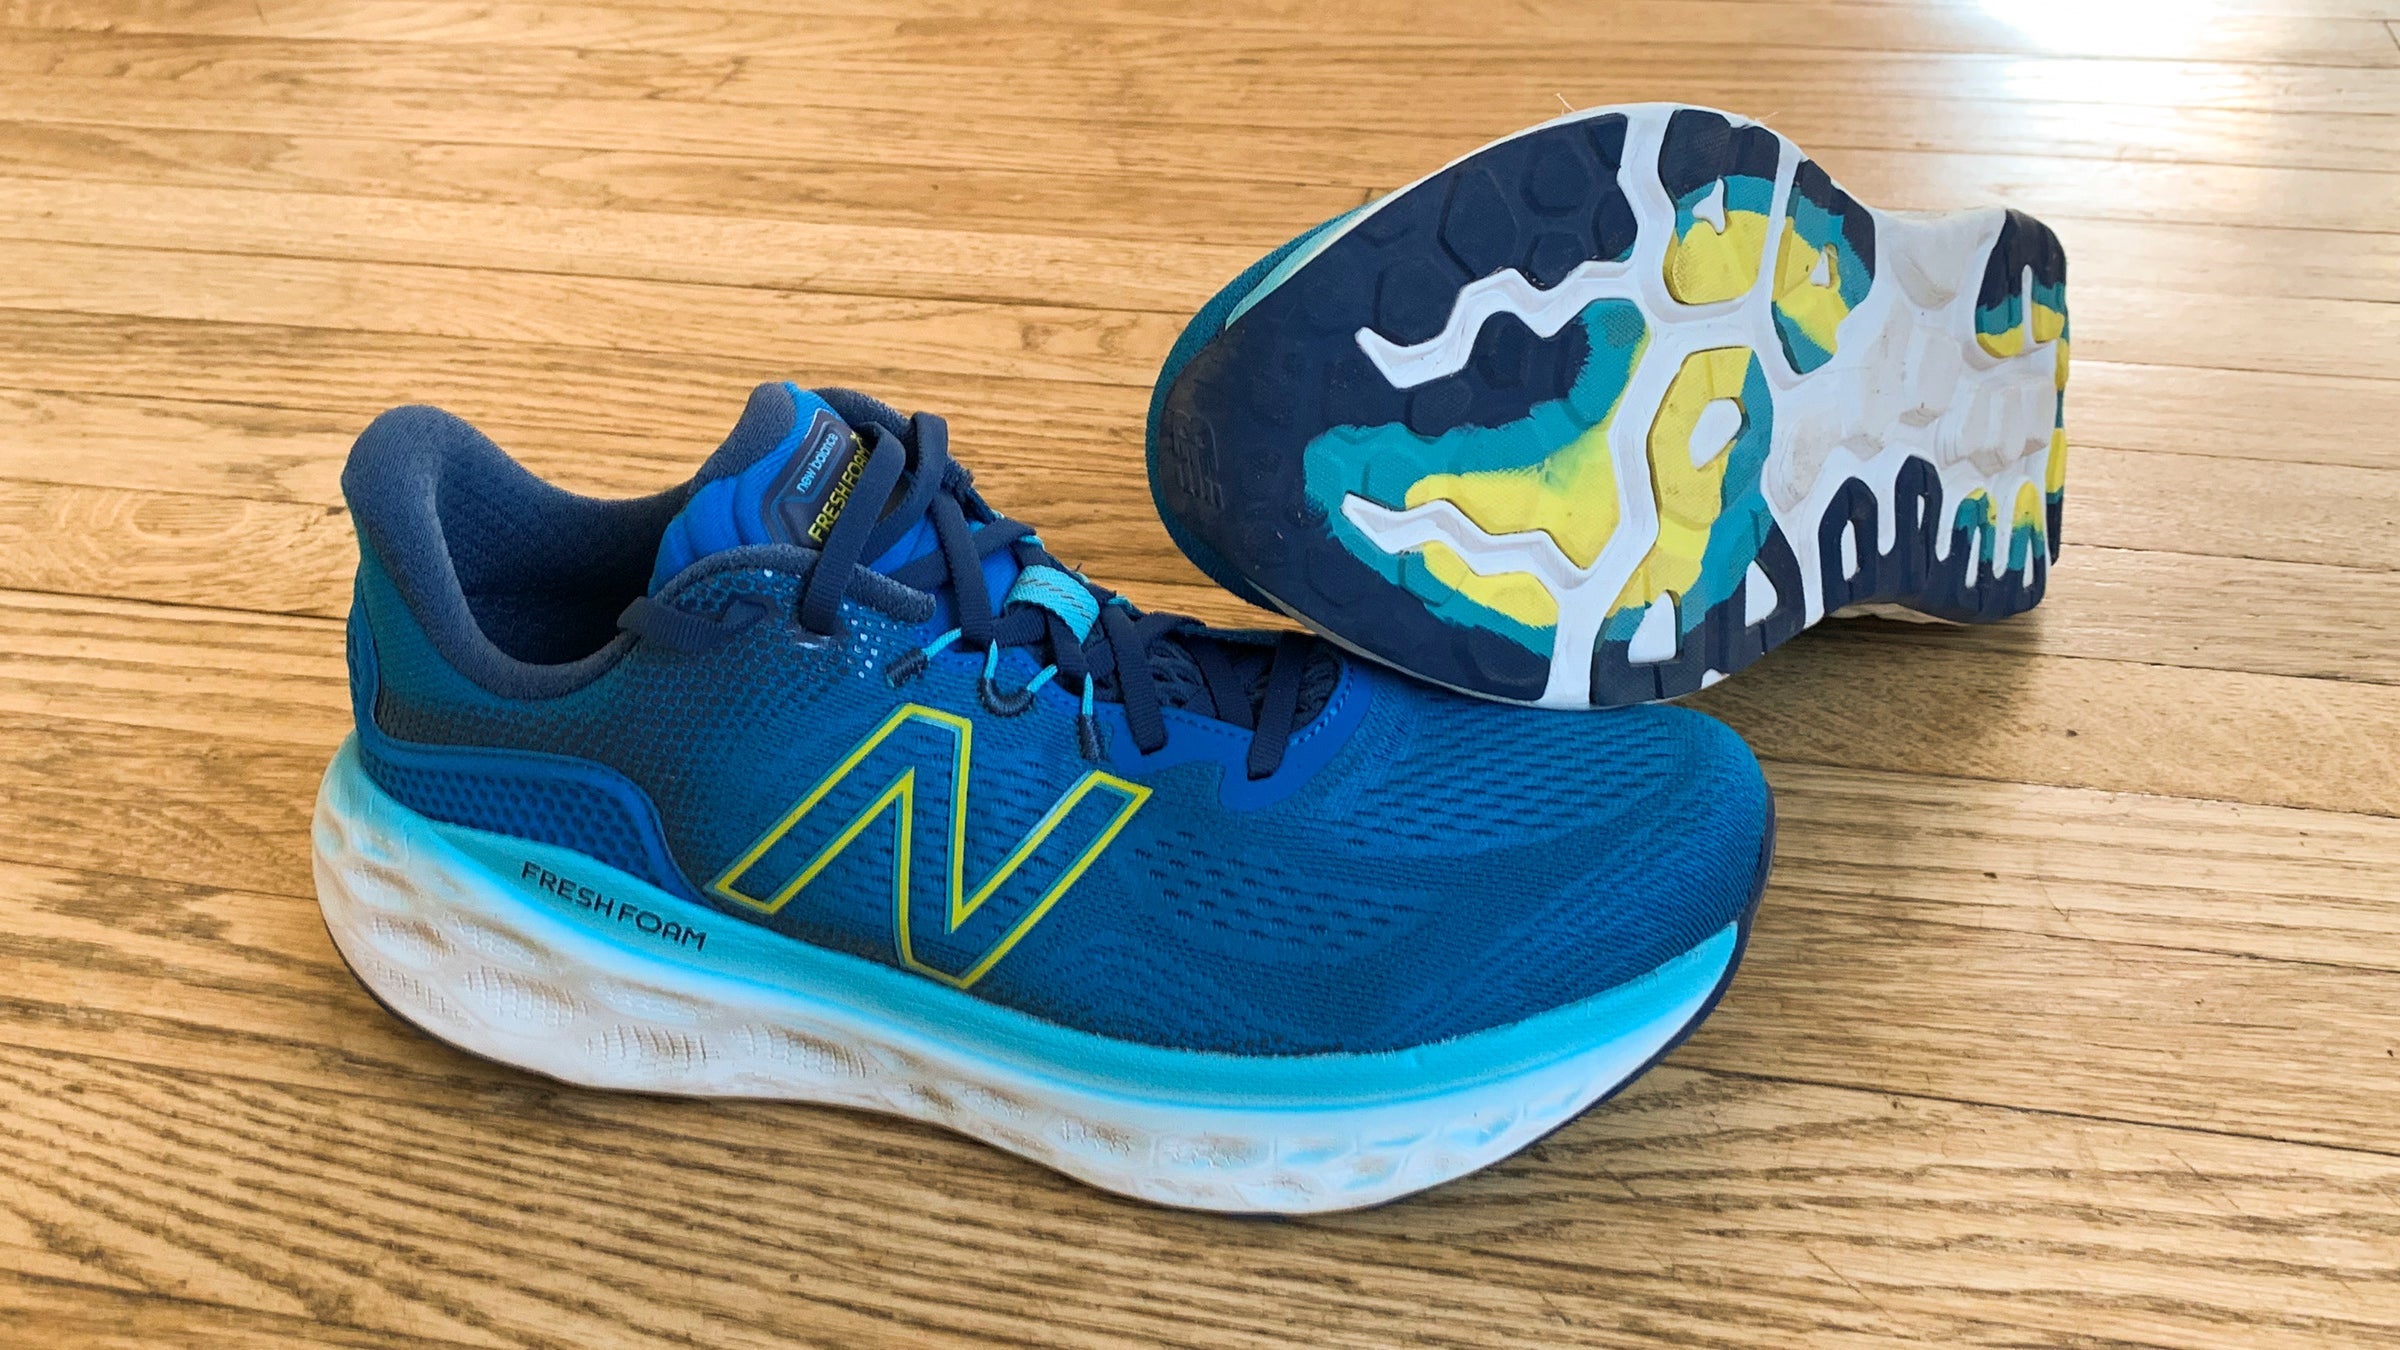 New Balance More V3: Shoe of the Week